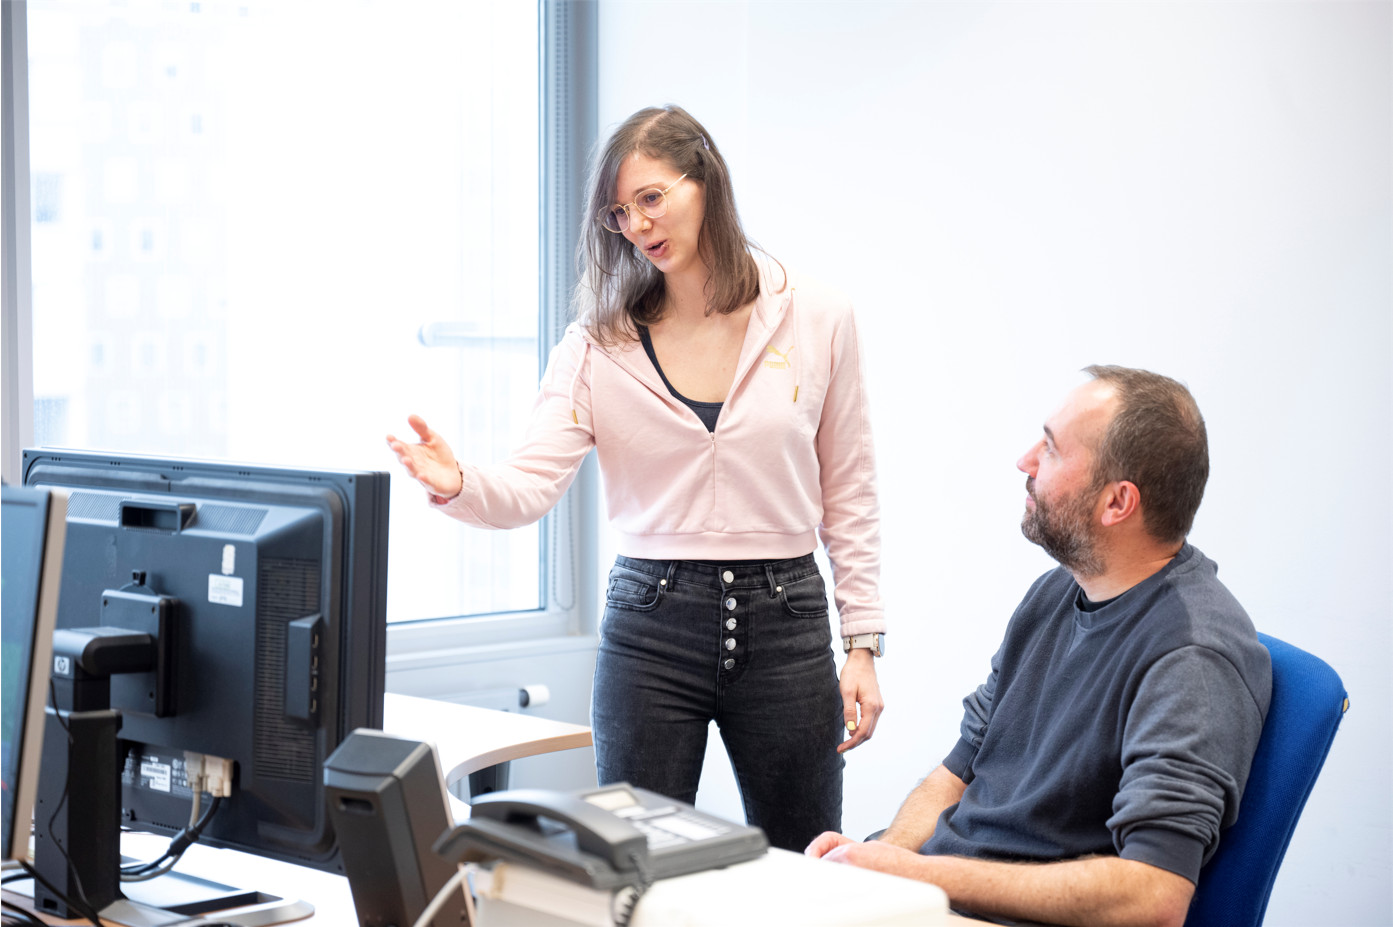 A researcher, on the left, standing, explains something on the screen to a researcher, on the right, sitting.